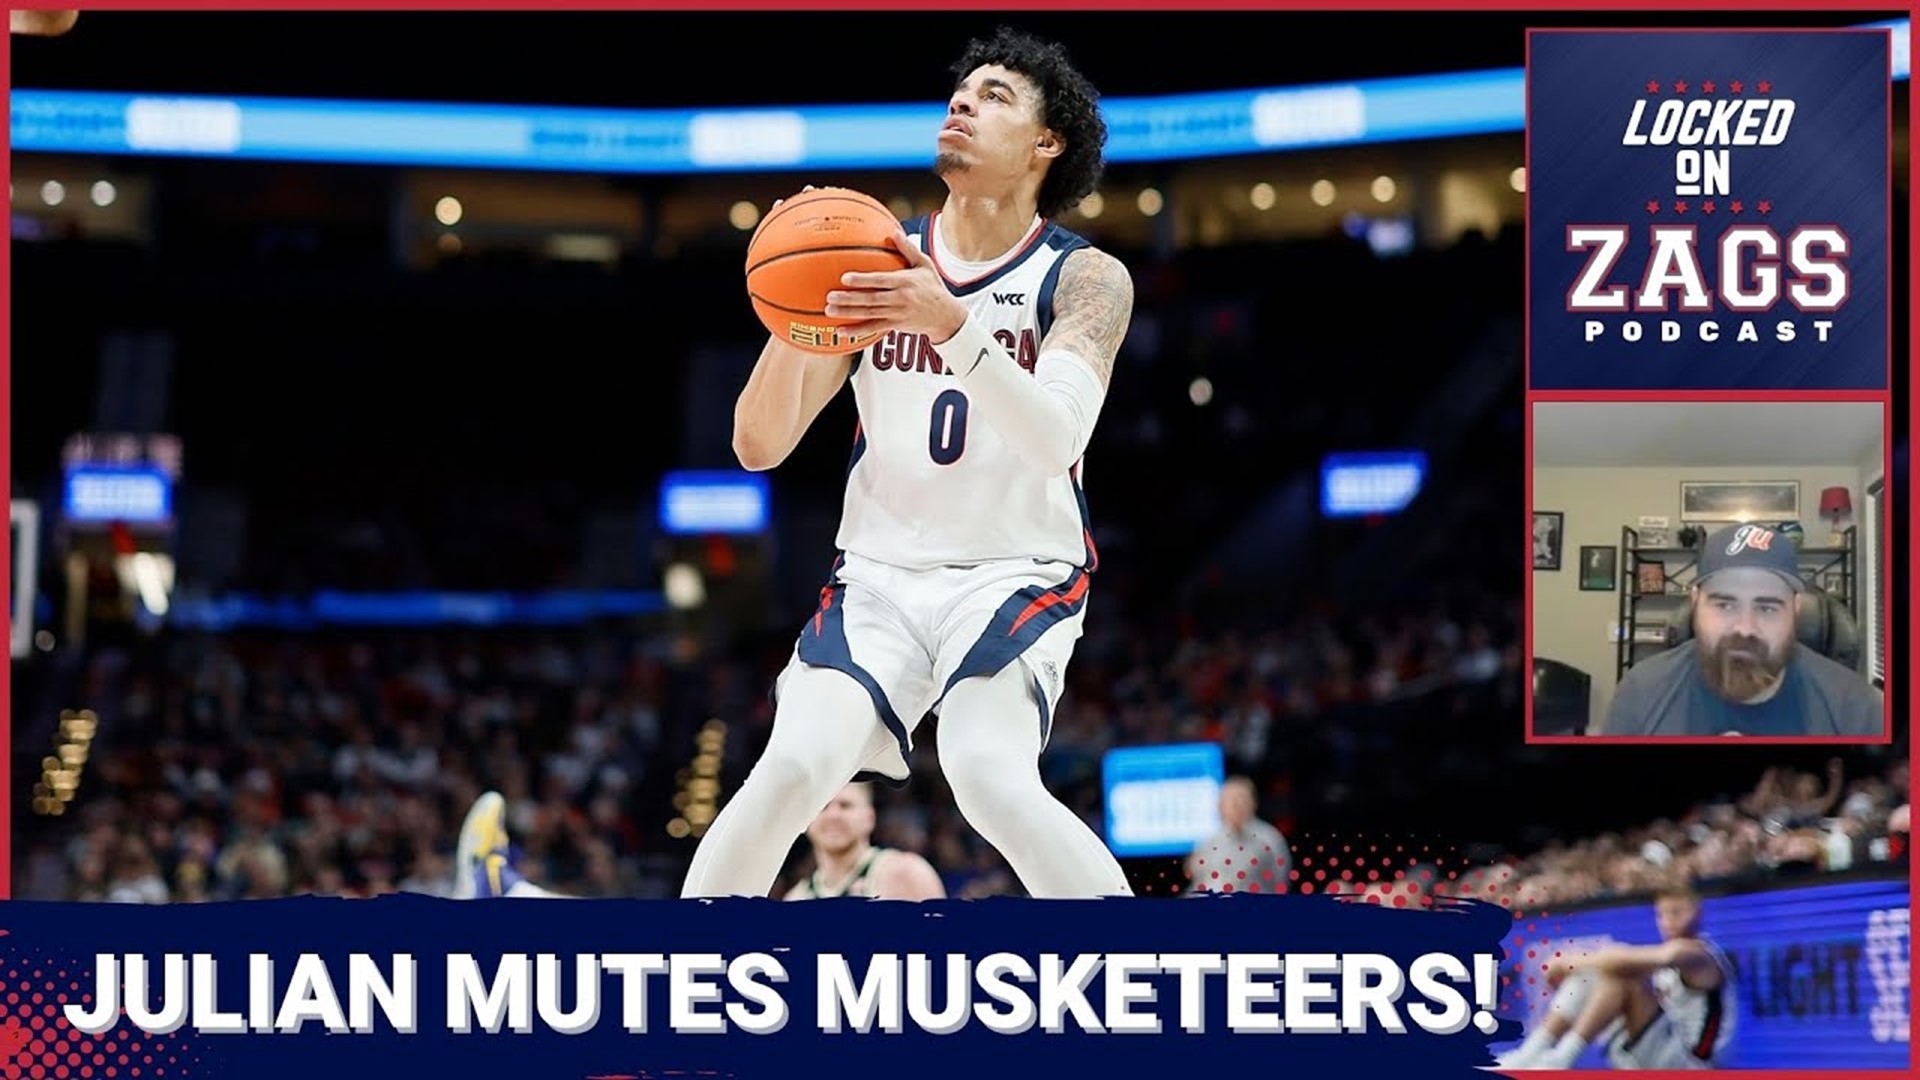 The Gonzaga Bulldogs finished third in the PK85 after defeating Sean Miller's Xavier Musketeers on Sunday, behind a career-high 23 points from Julian Strawther.